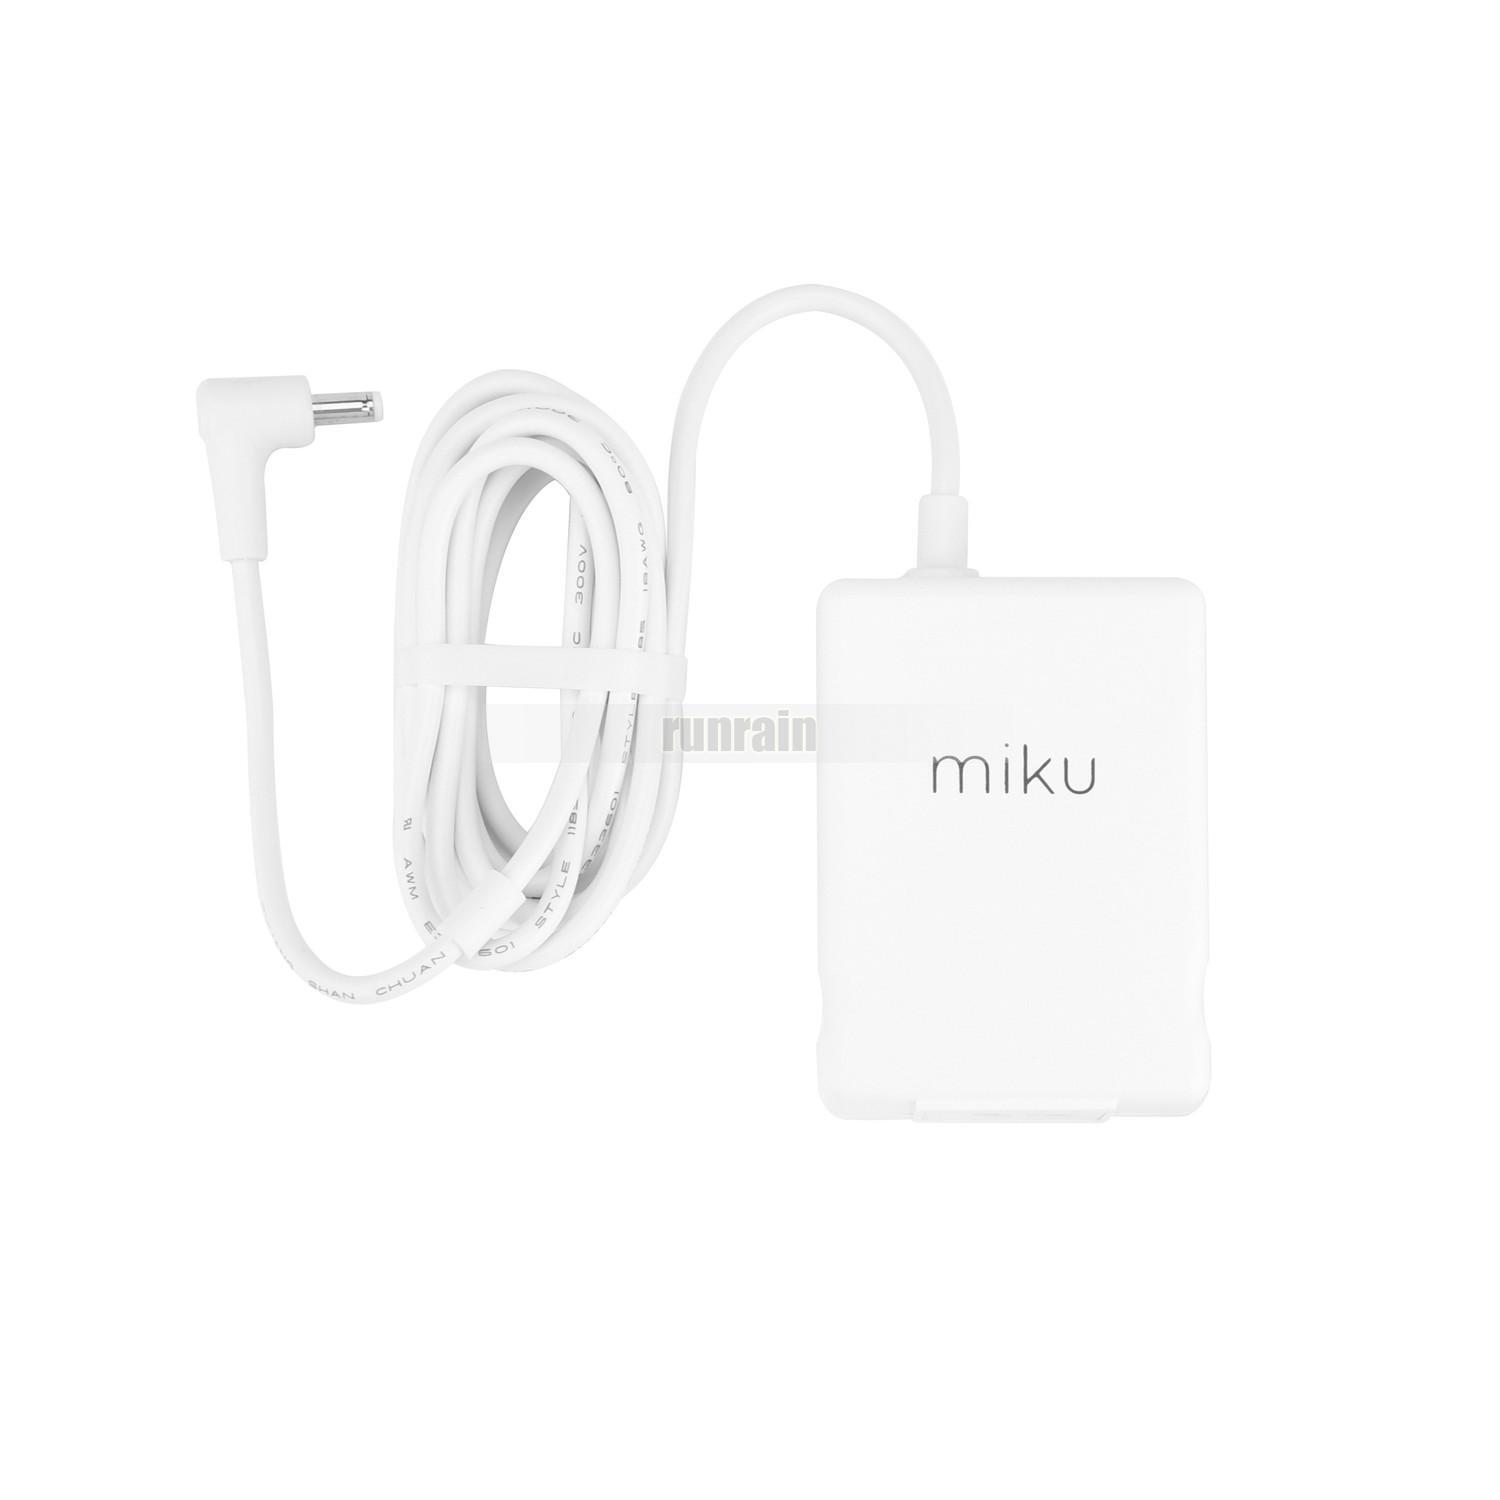 Miku Smart Baby Monitor Power Supply AD15AM050300 AC Adapter 5V 3A Brand MIKU Model AD15AM050300 MPN Does Not Apply Typ